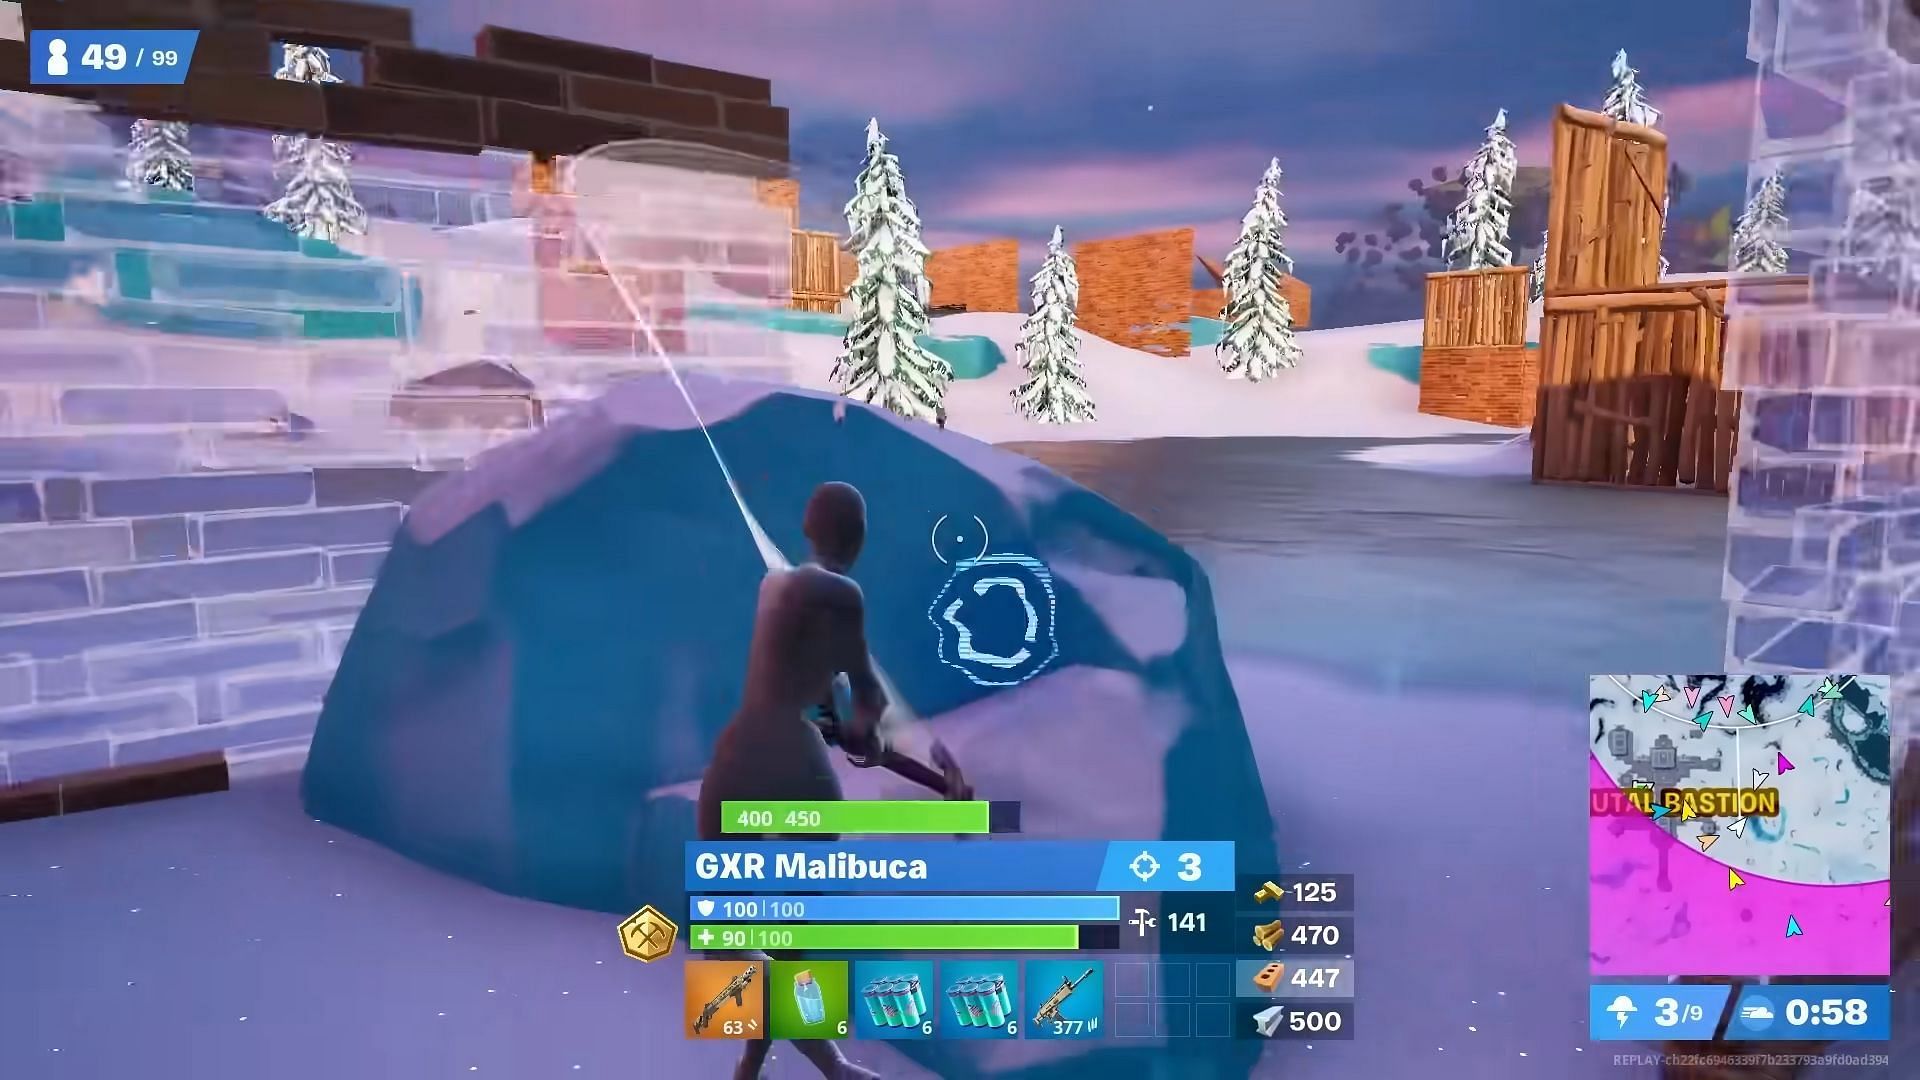 Using materials that are available (Image via YouTube/Reisshub)